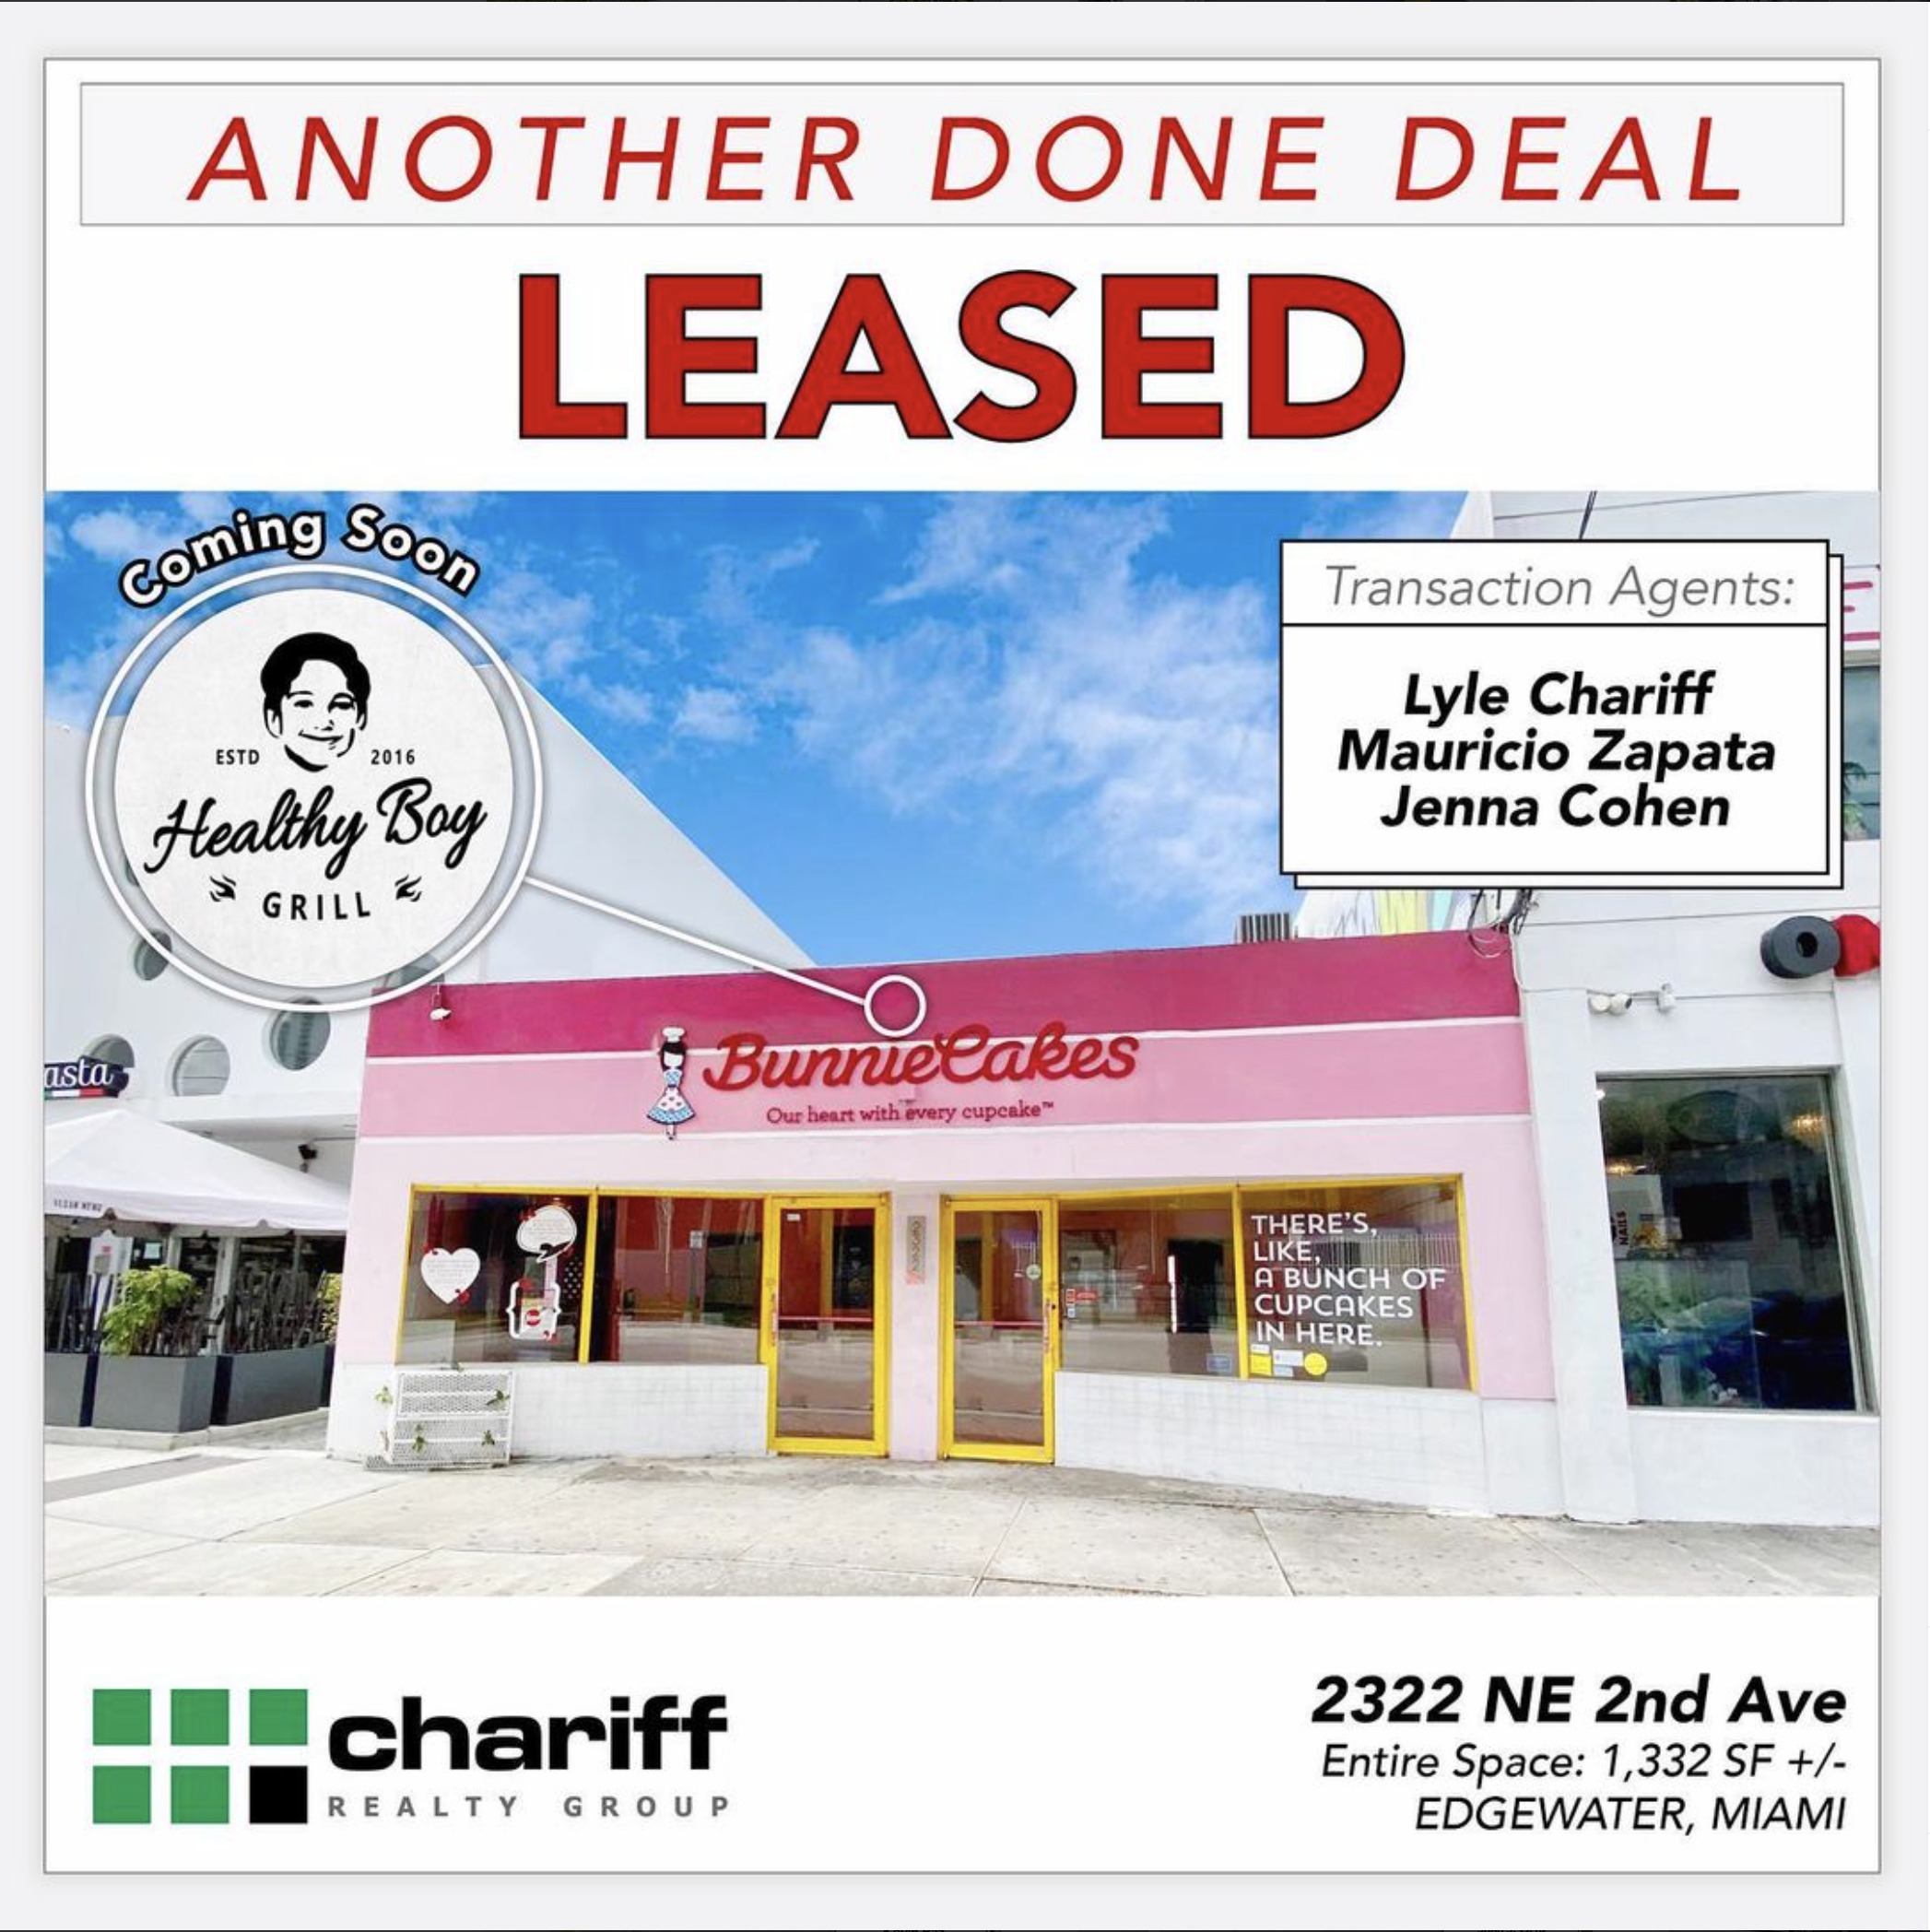 2322 NE 2nd Ave - Another Done Deal - Leased - Edgewater - Miami-Florida-33137-Chariff Realty Group